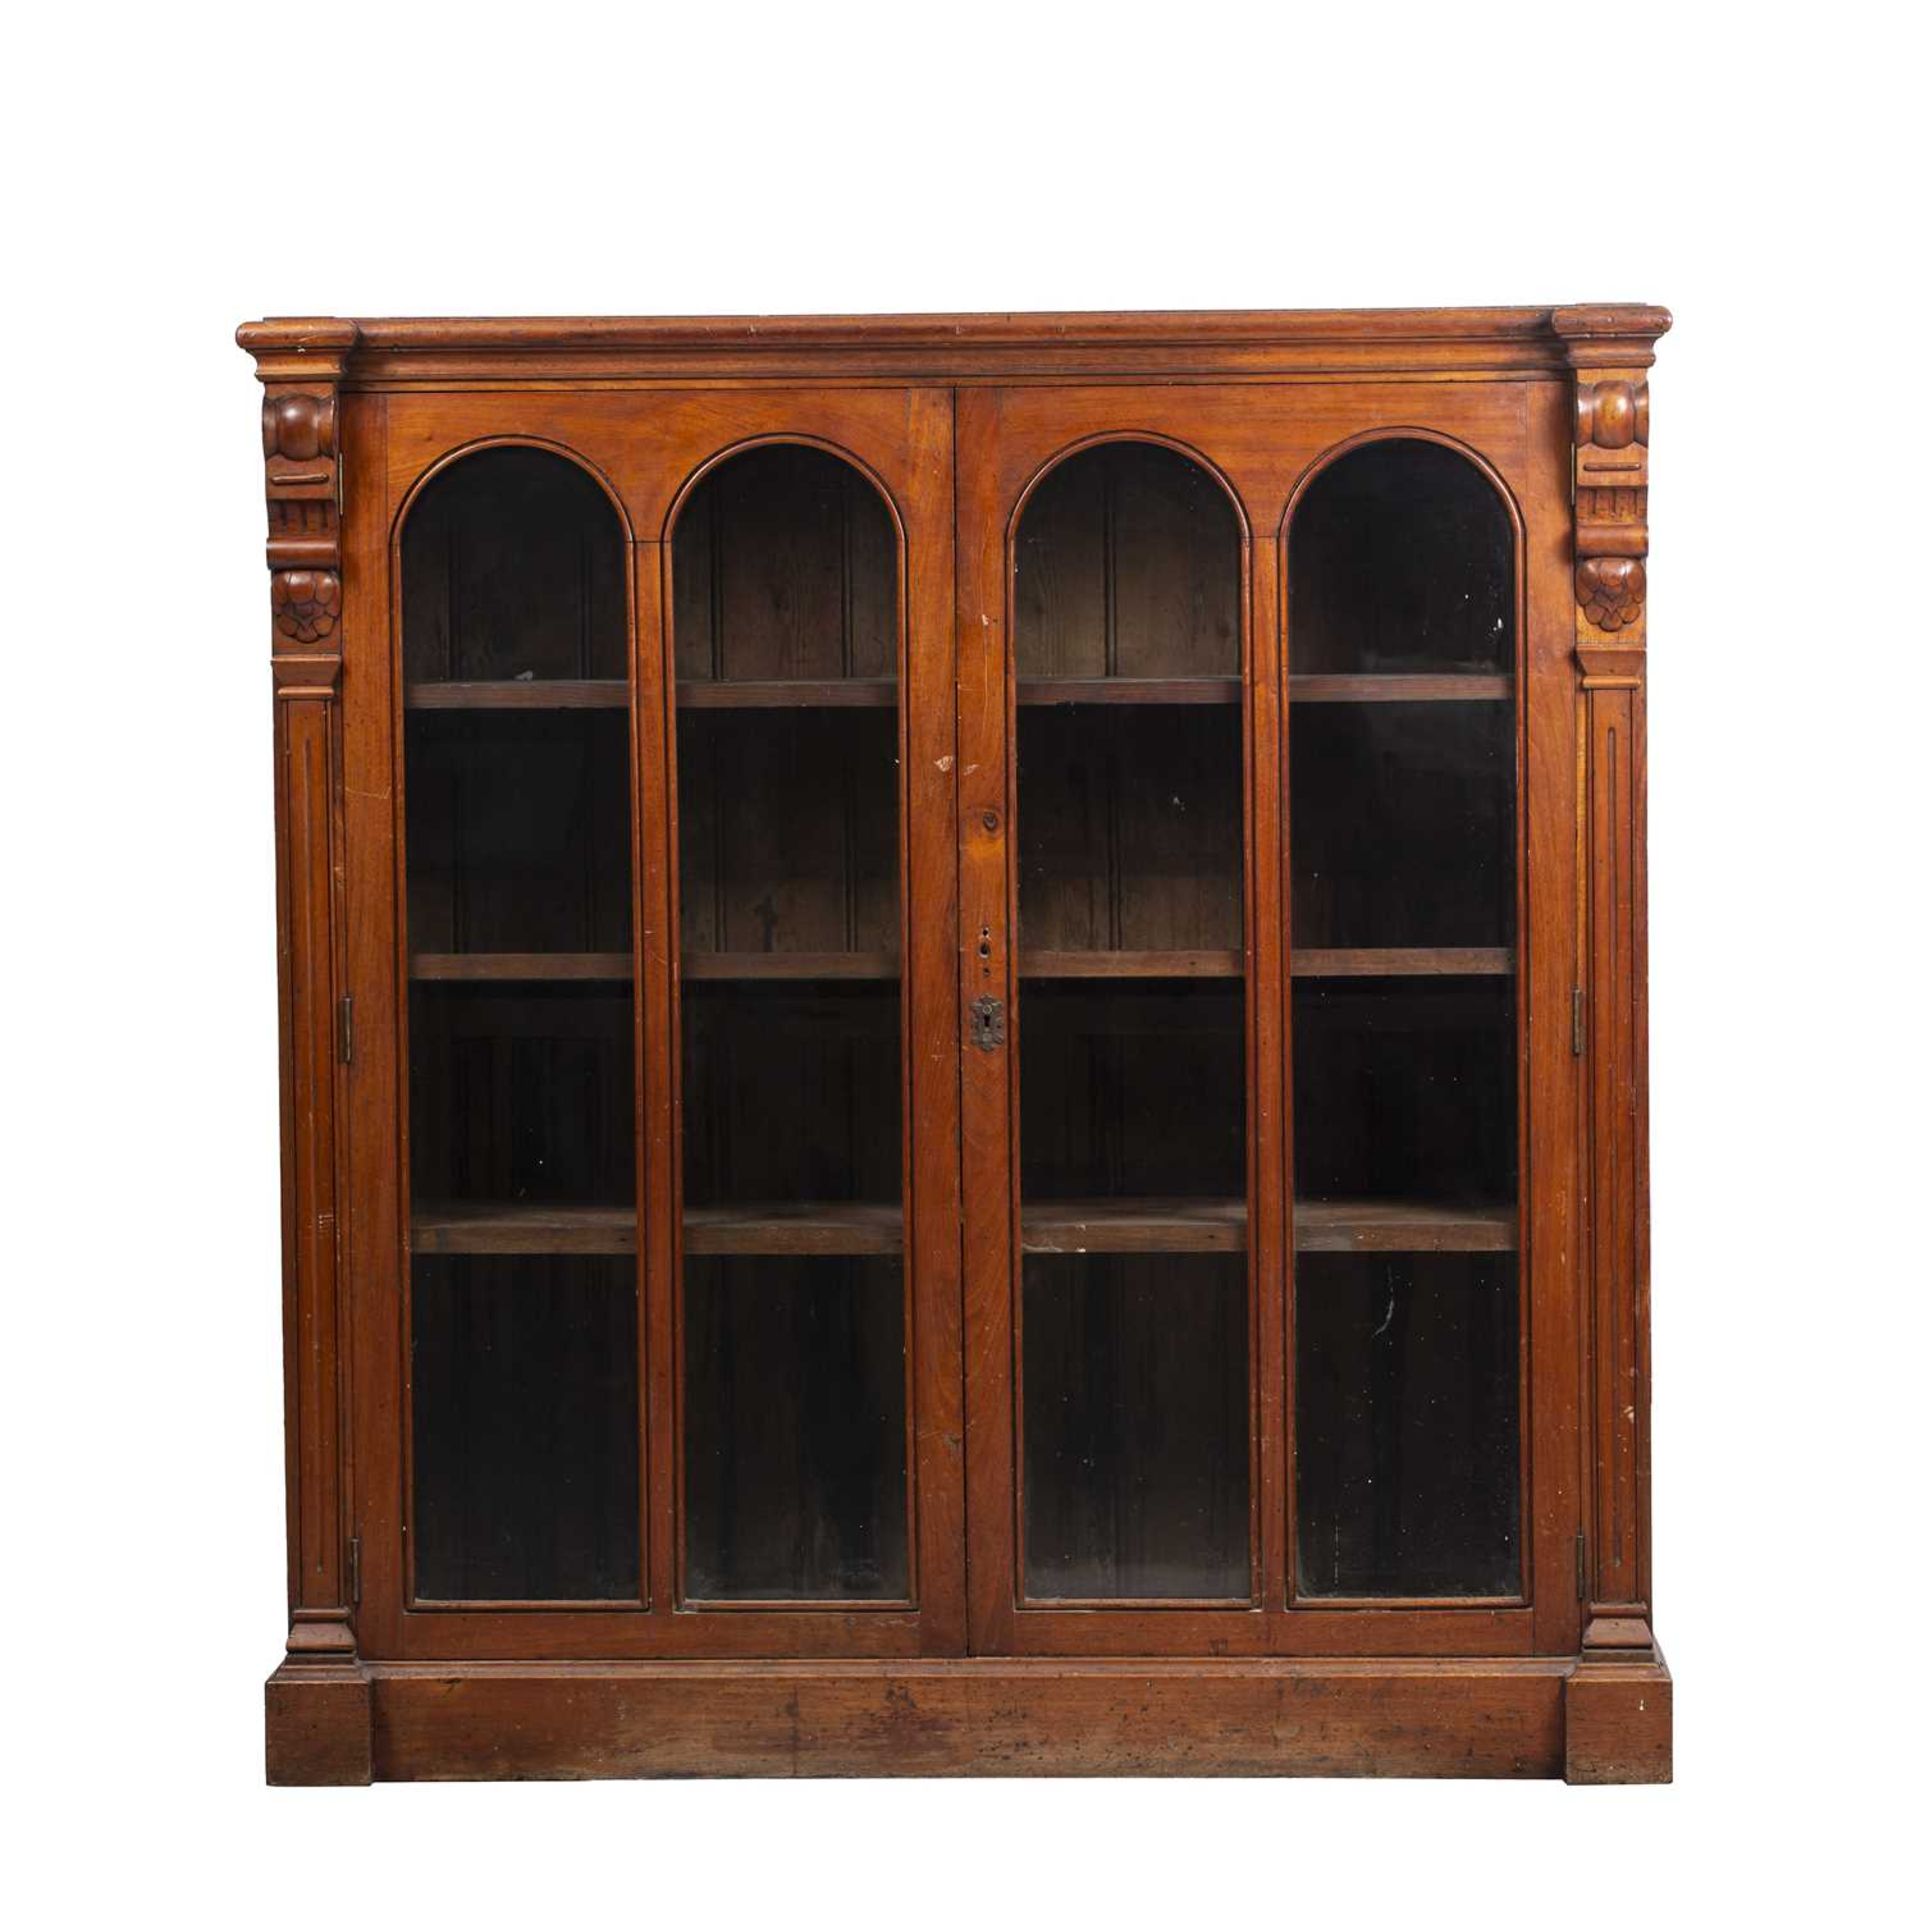 A Victorian mahogany bookcase with twin glazed doors and a plinth base 117cm wide x 38cm deep x